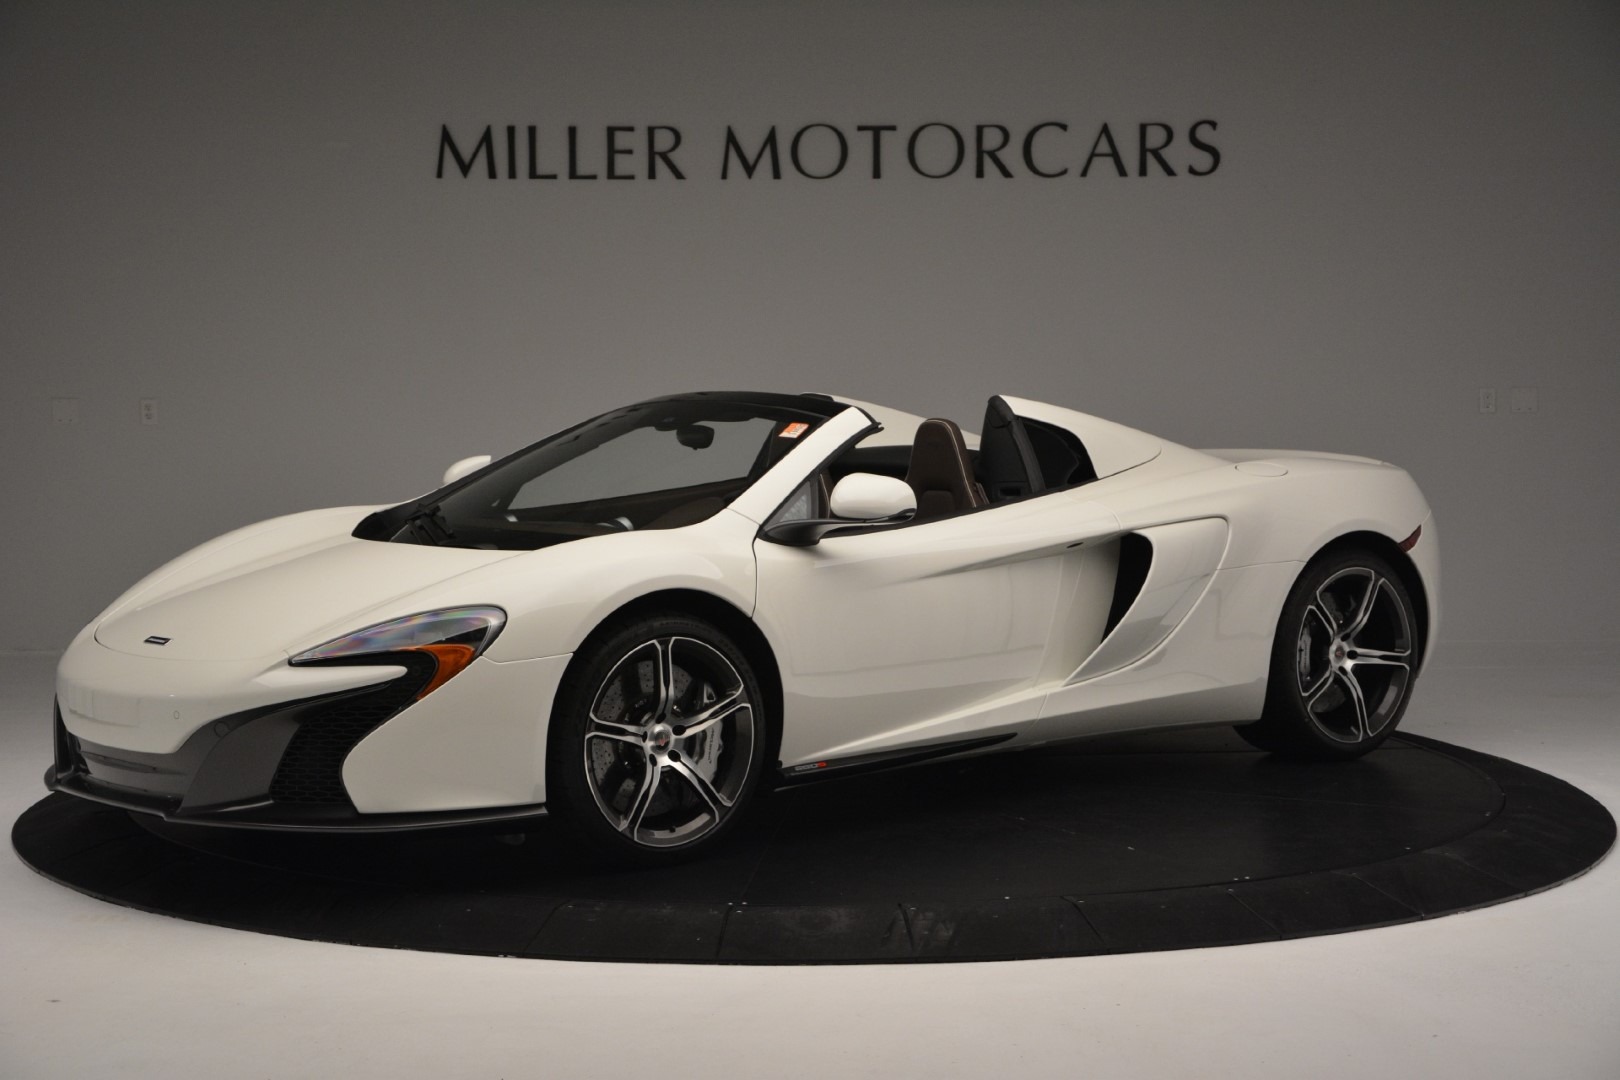 Used 2015 McLaren 650S Spider for sale Sold at Alfa Romeo of Greenwich in Greenwich CT 06830 1